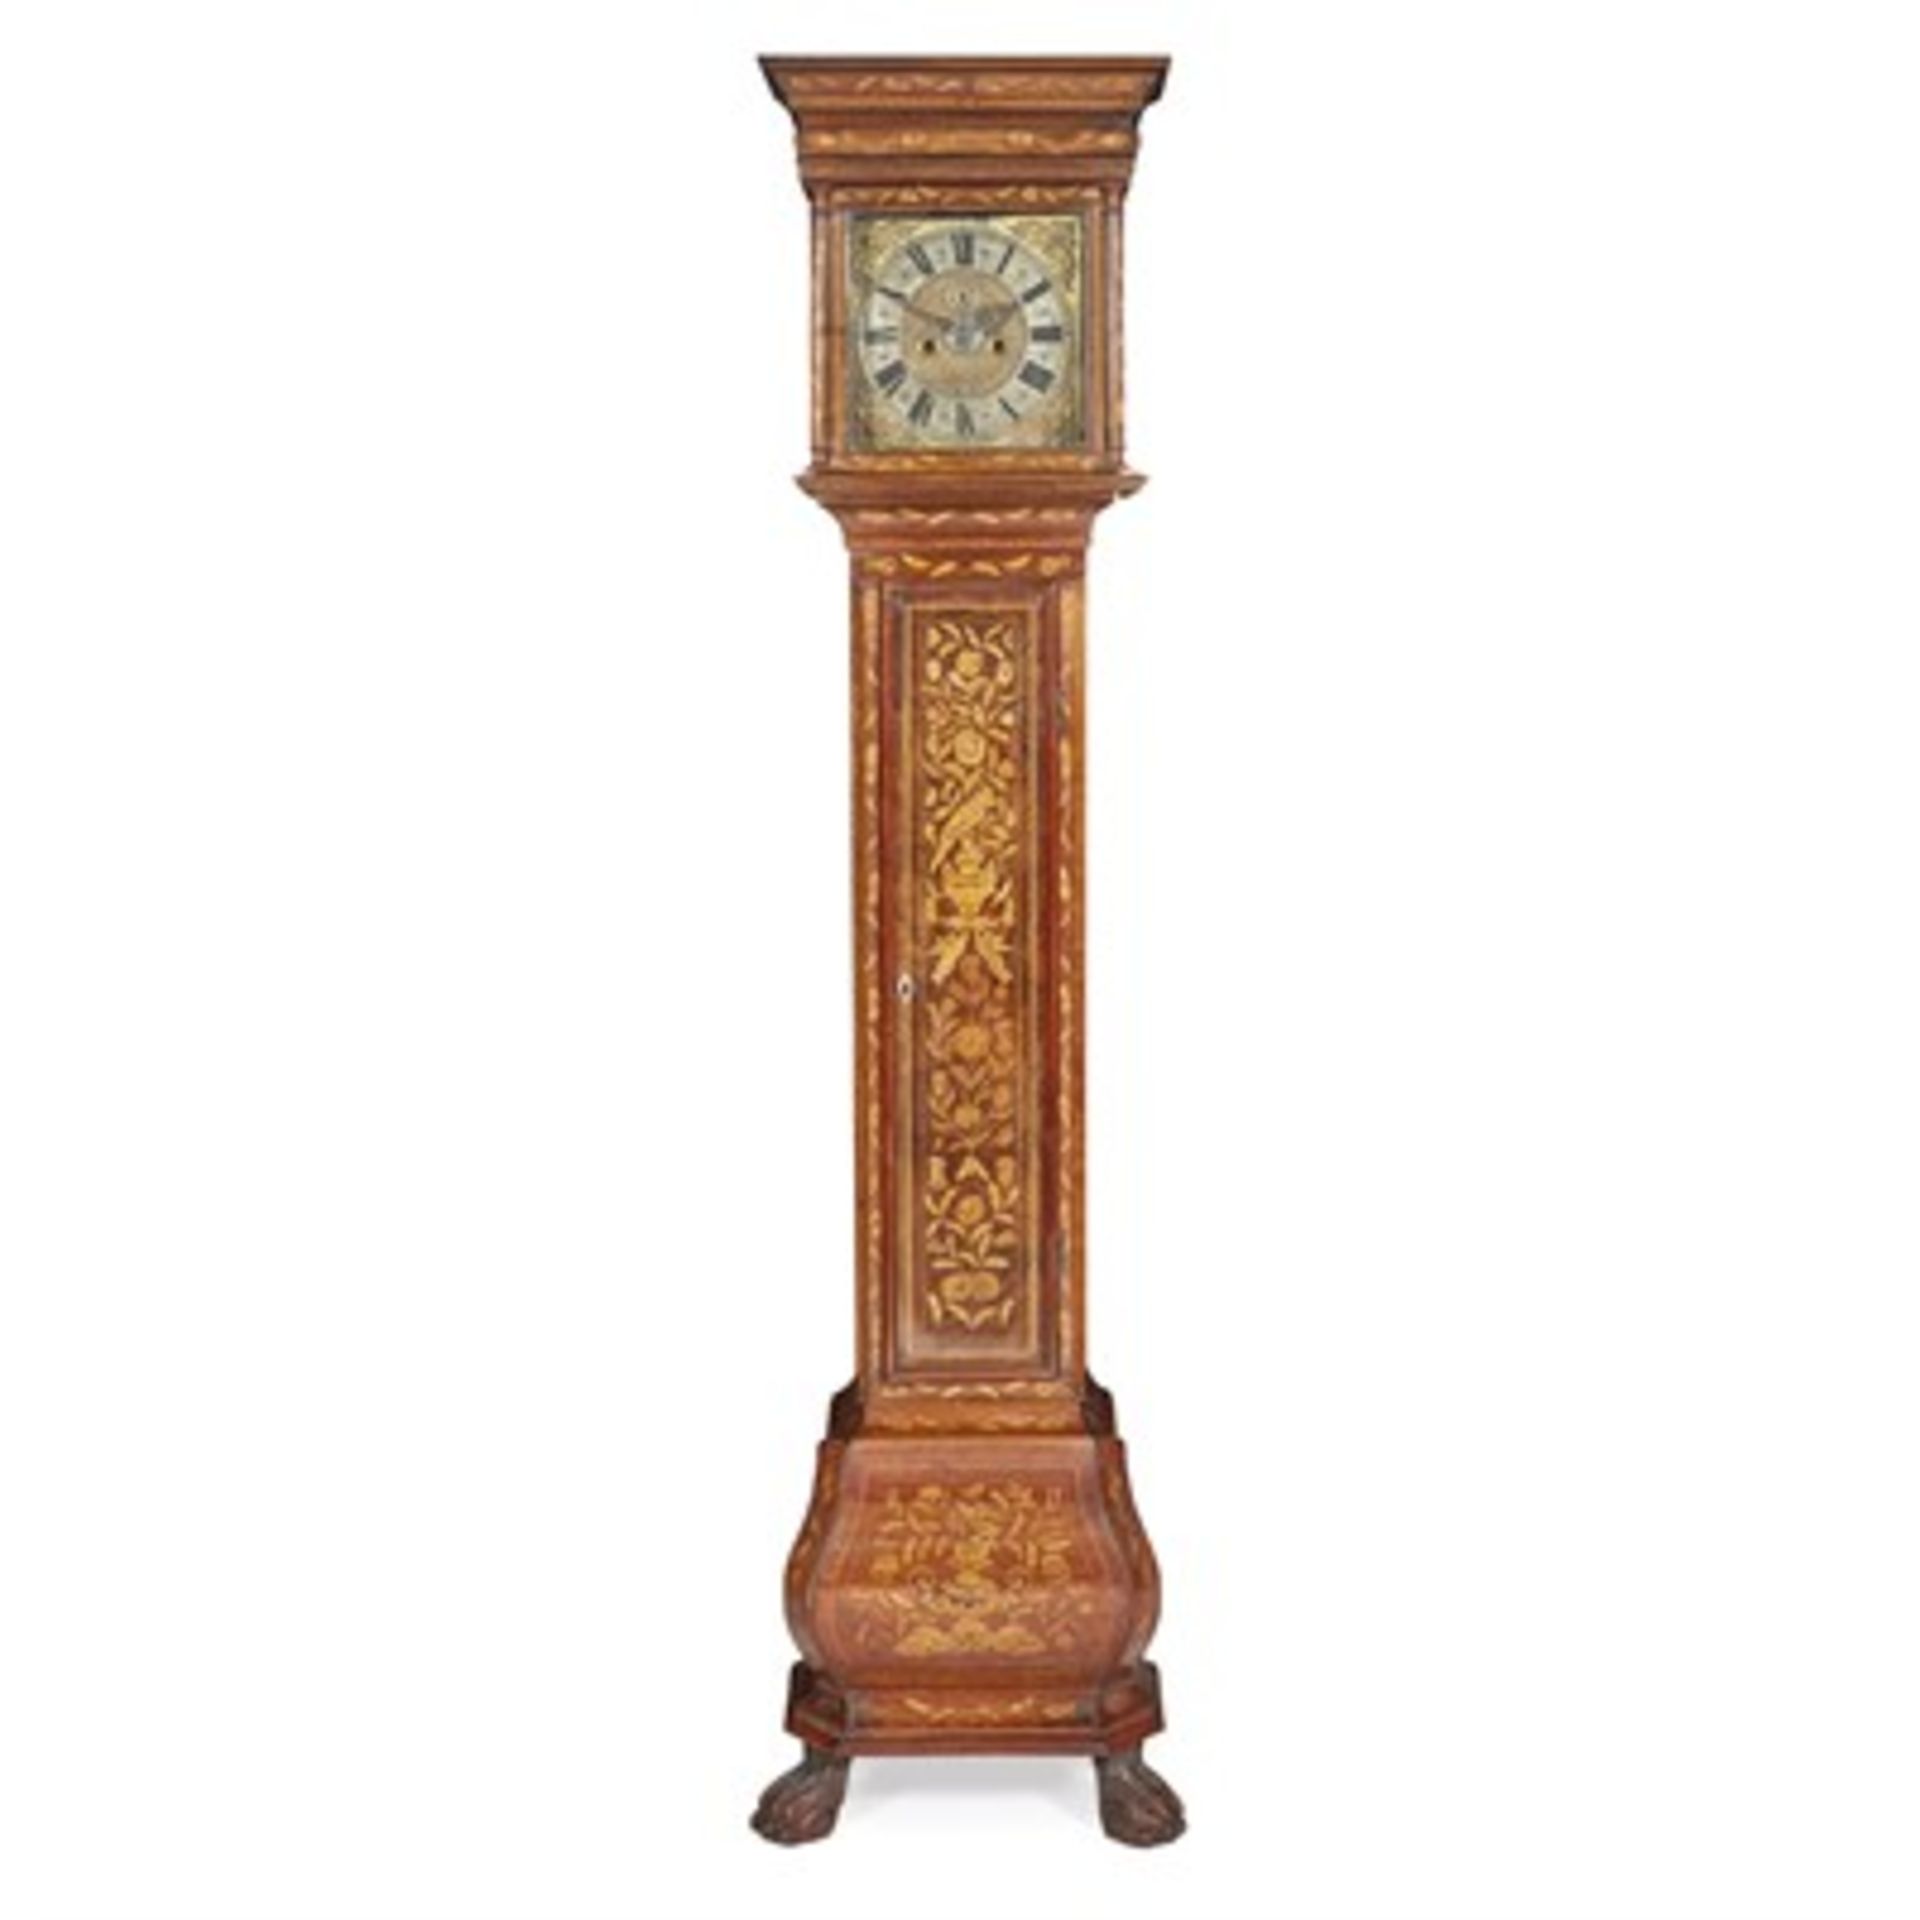 DUTCH MARQUETRY LONGCASE CLOCK SECOND QUARTER 18TH CENTURY the moulded cornice above the 10in. brass